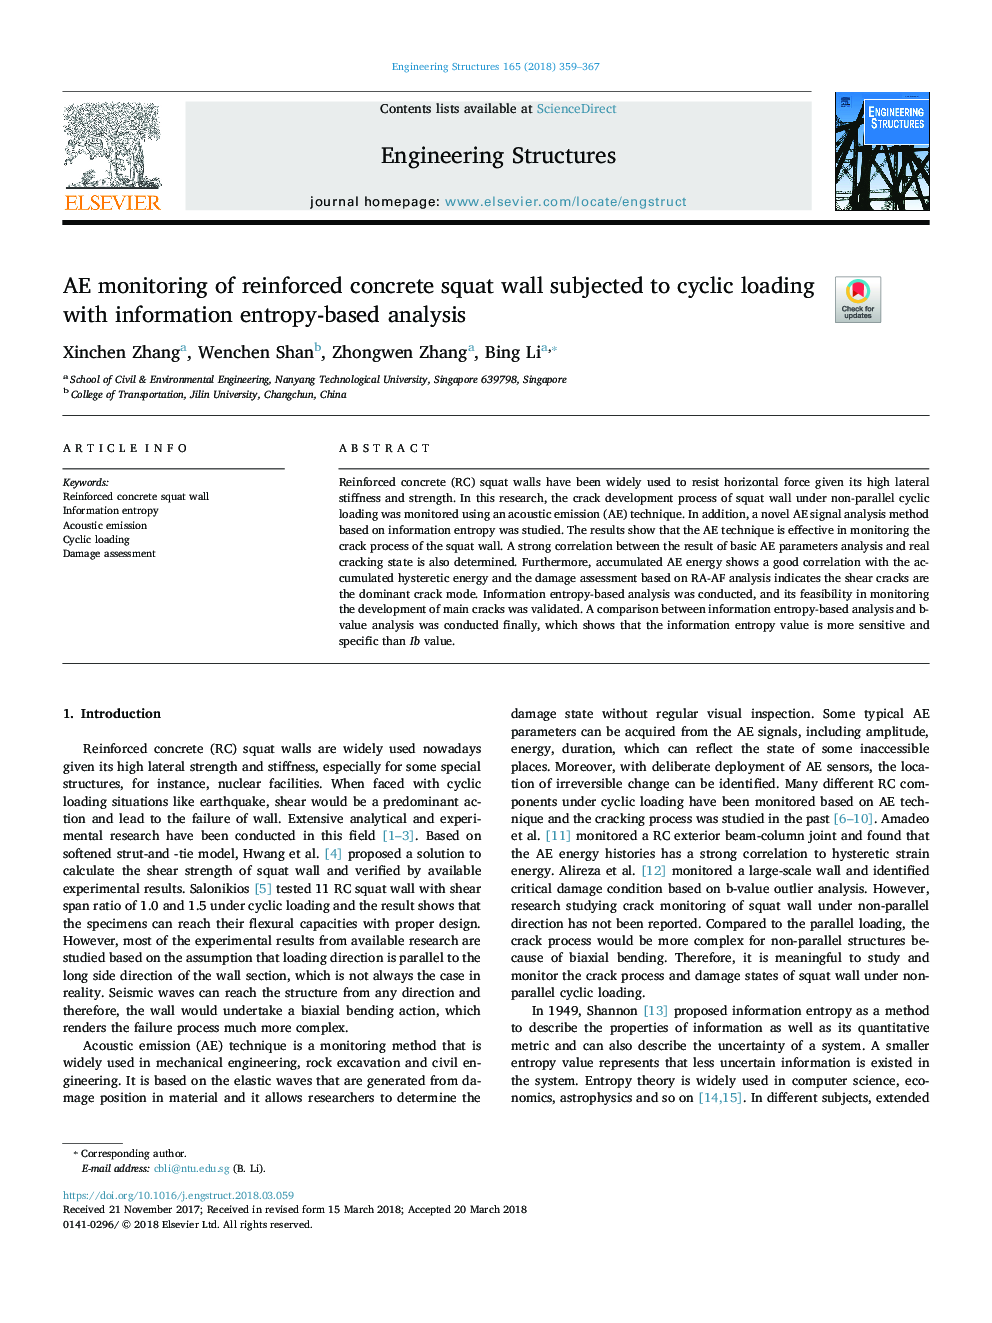 AE monitoring of reinforced concrete squat wall subjected to cyclic loading with information entropy-based analysis